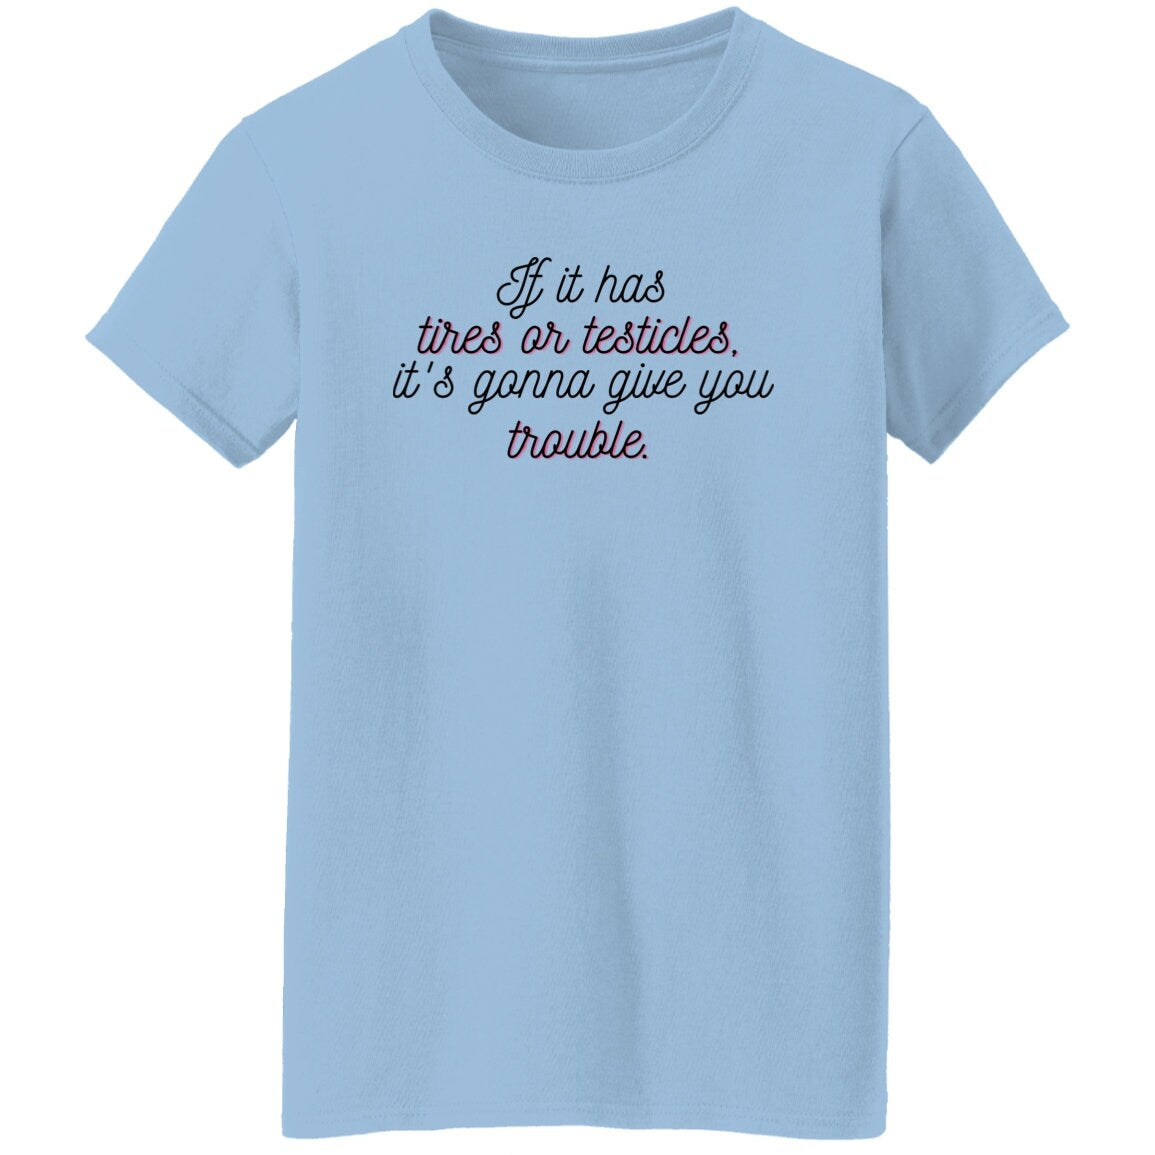 If it has tires or testicles, it's gonna be trouble. T-Shirt